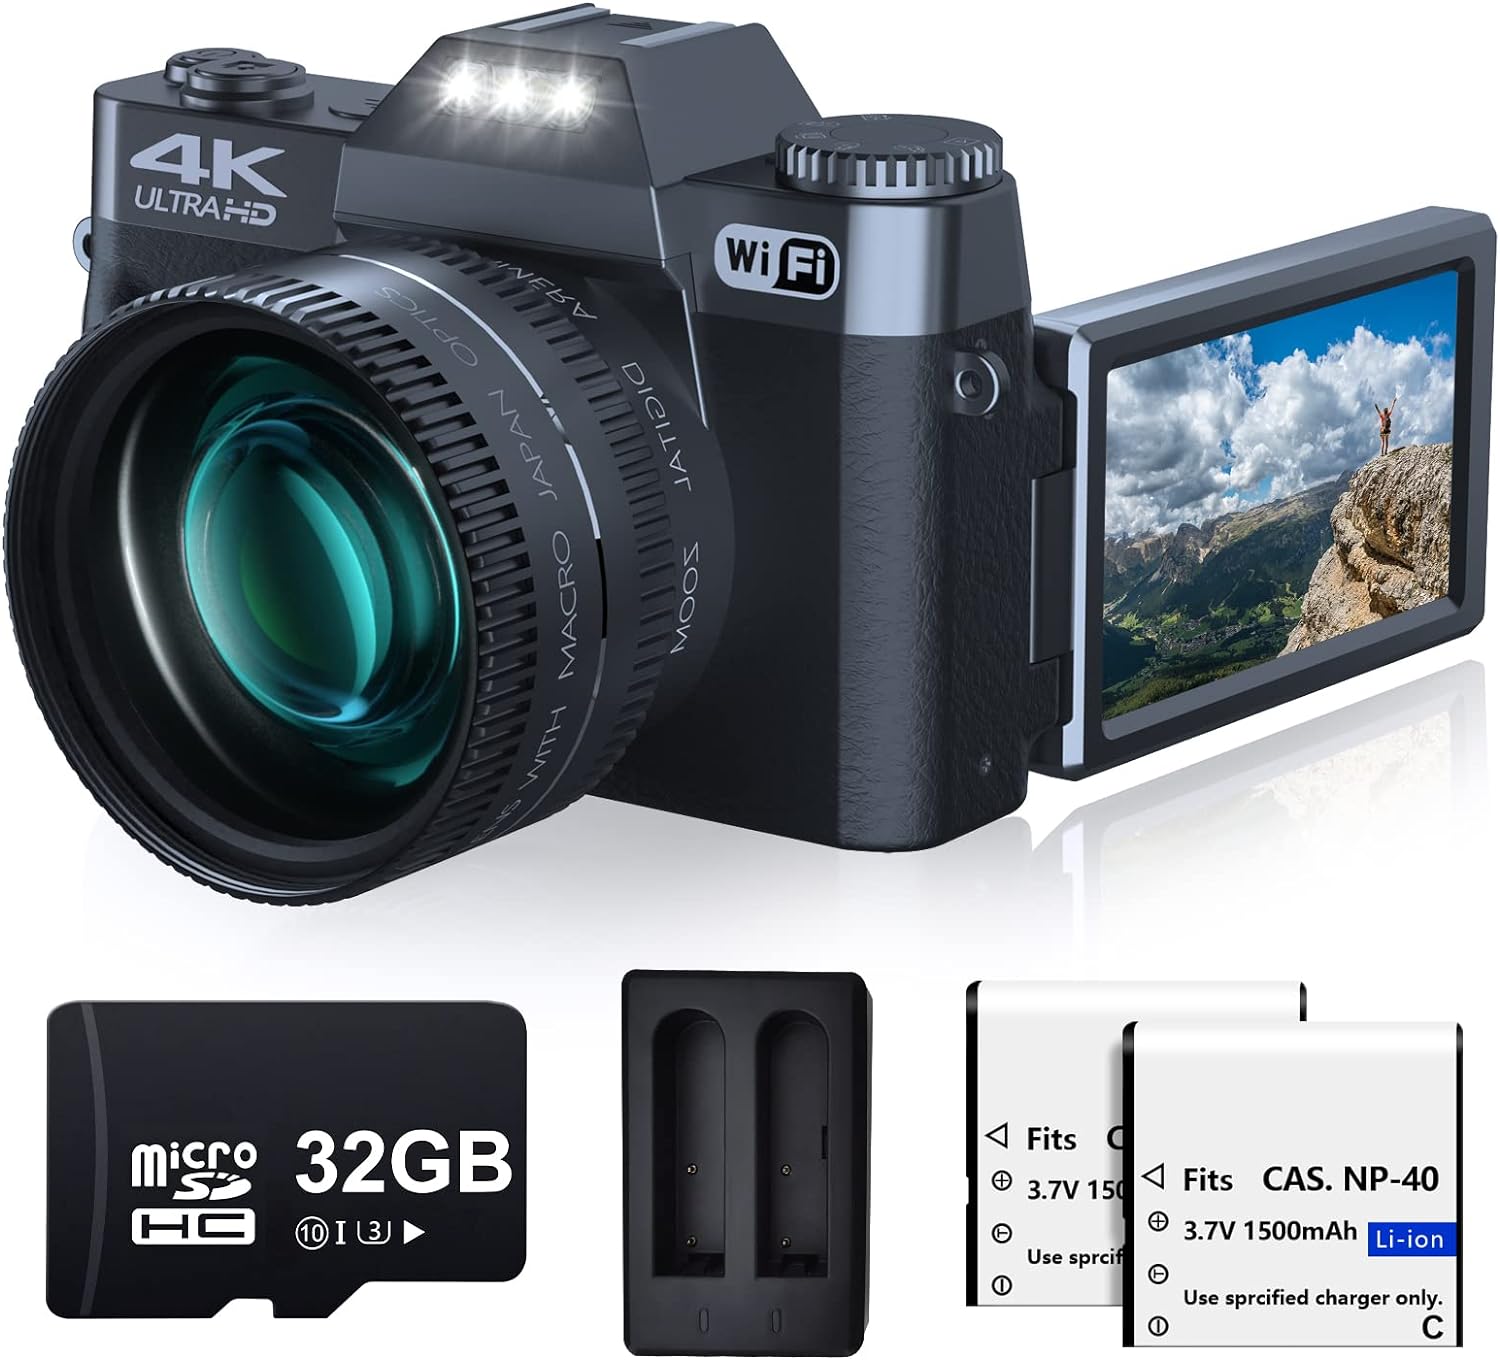 VJIANGER 4K Digital Camera Review: Lightweight and Portable with Impressive Features